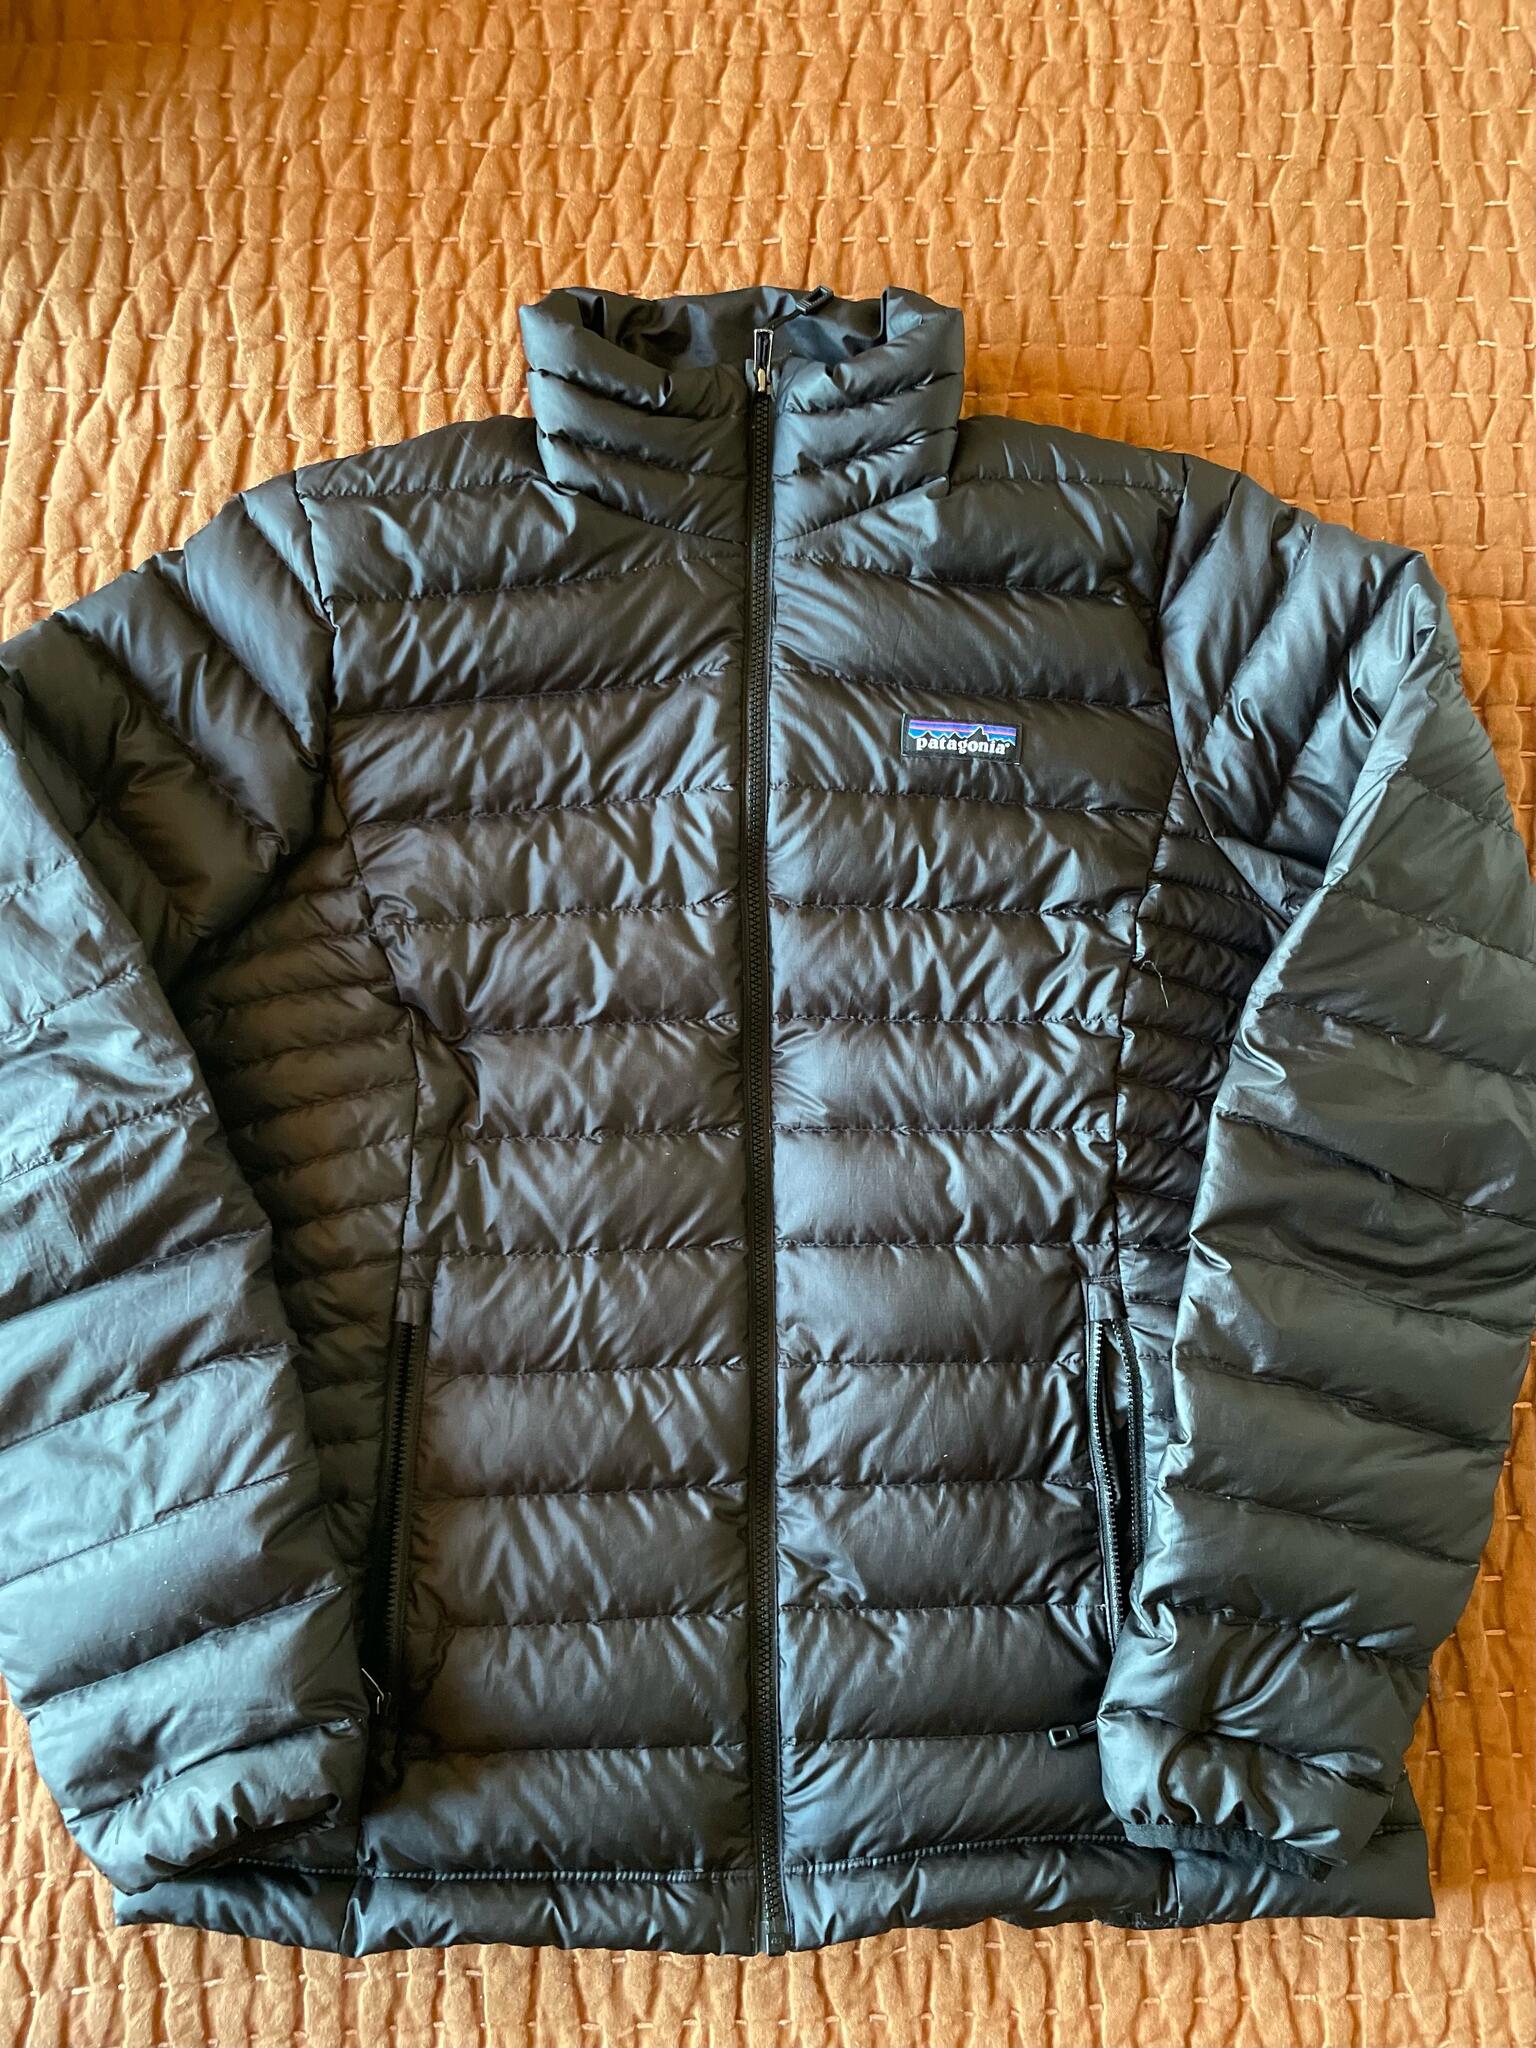 Patagonia Women's Down Sweater Jacket $150.00 for $150 in Seattle, WA ...